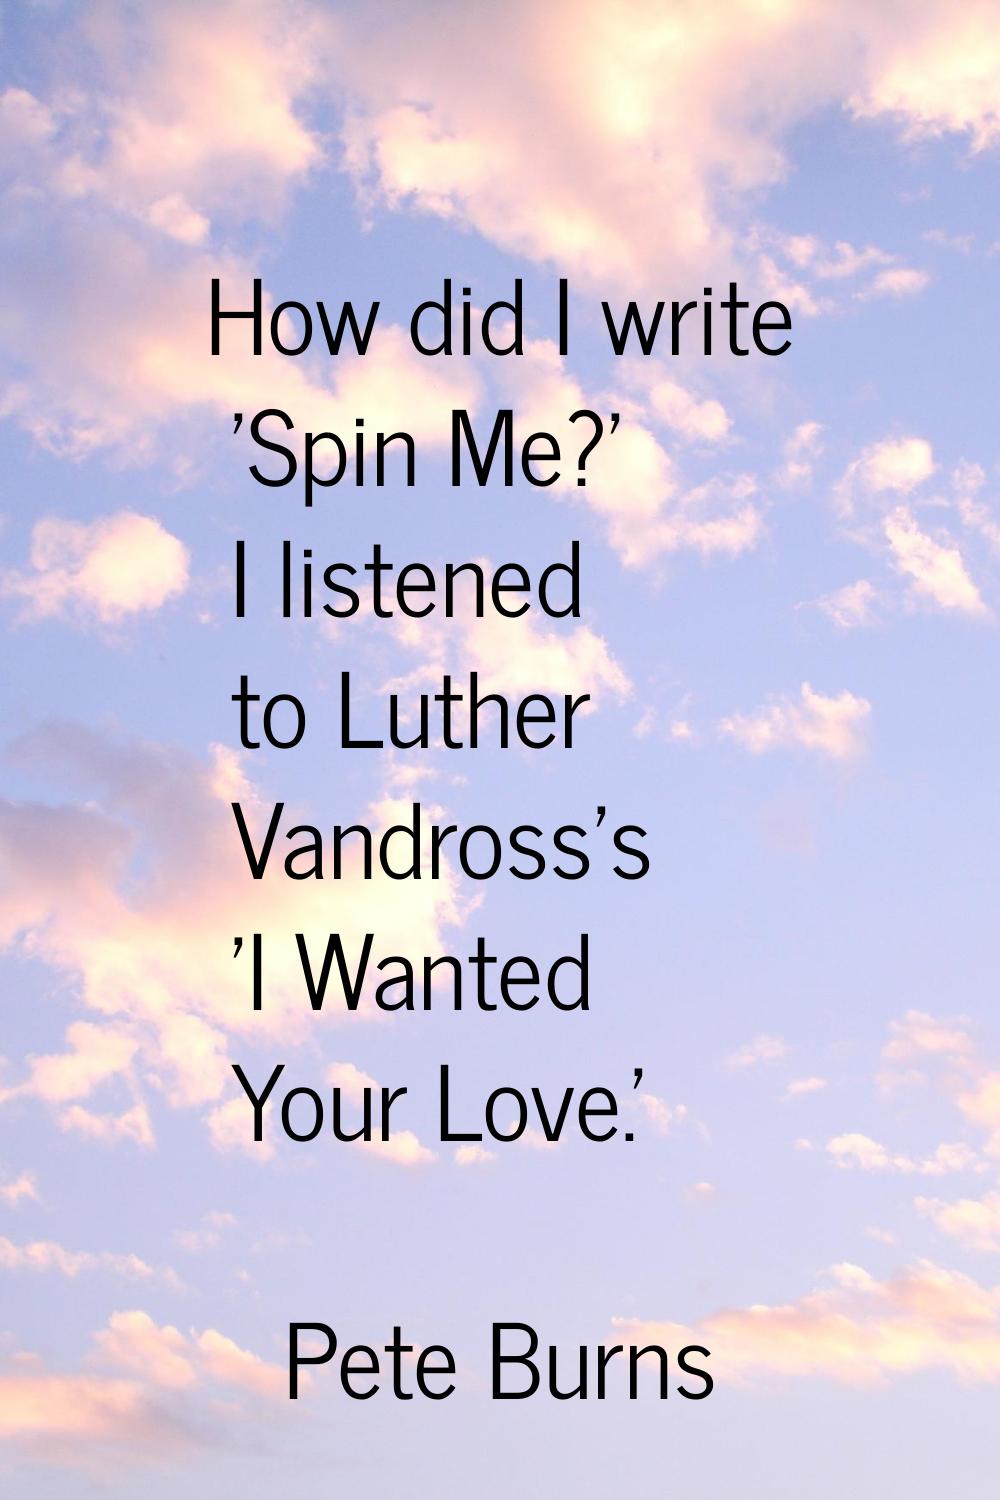 How did I write 'Spin Me?' I listened to Luther Vandross's 'I Wanted Your Love.'